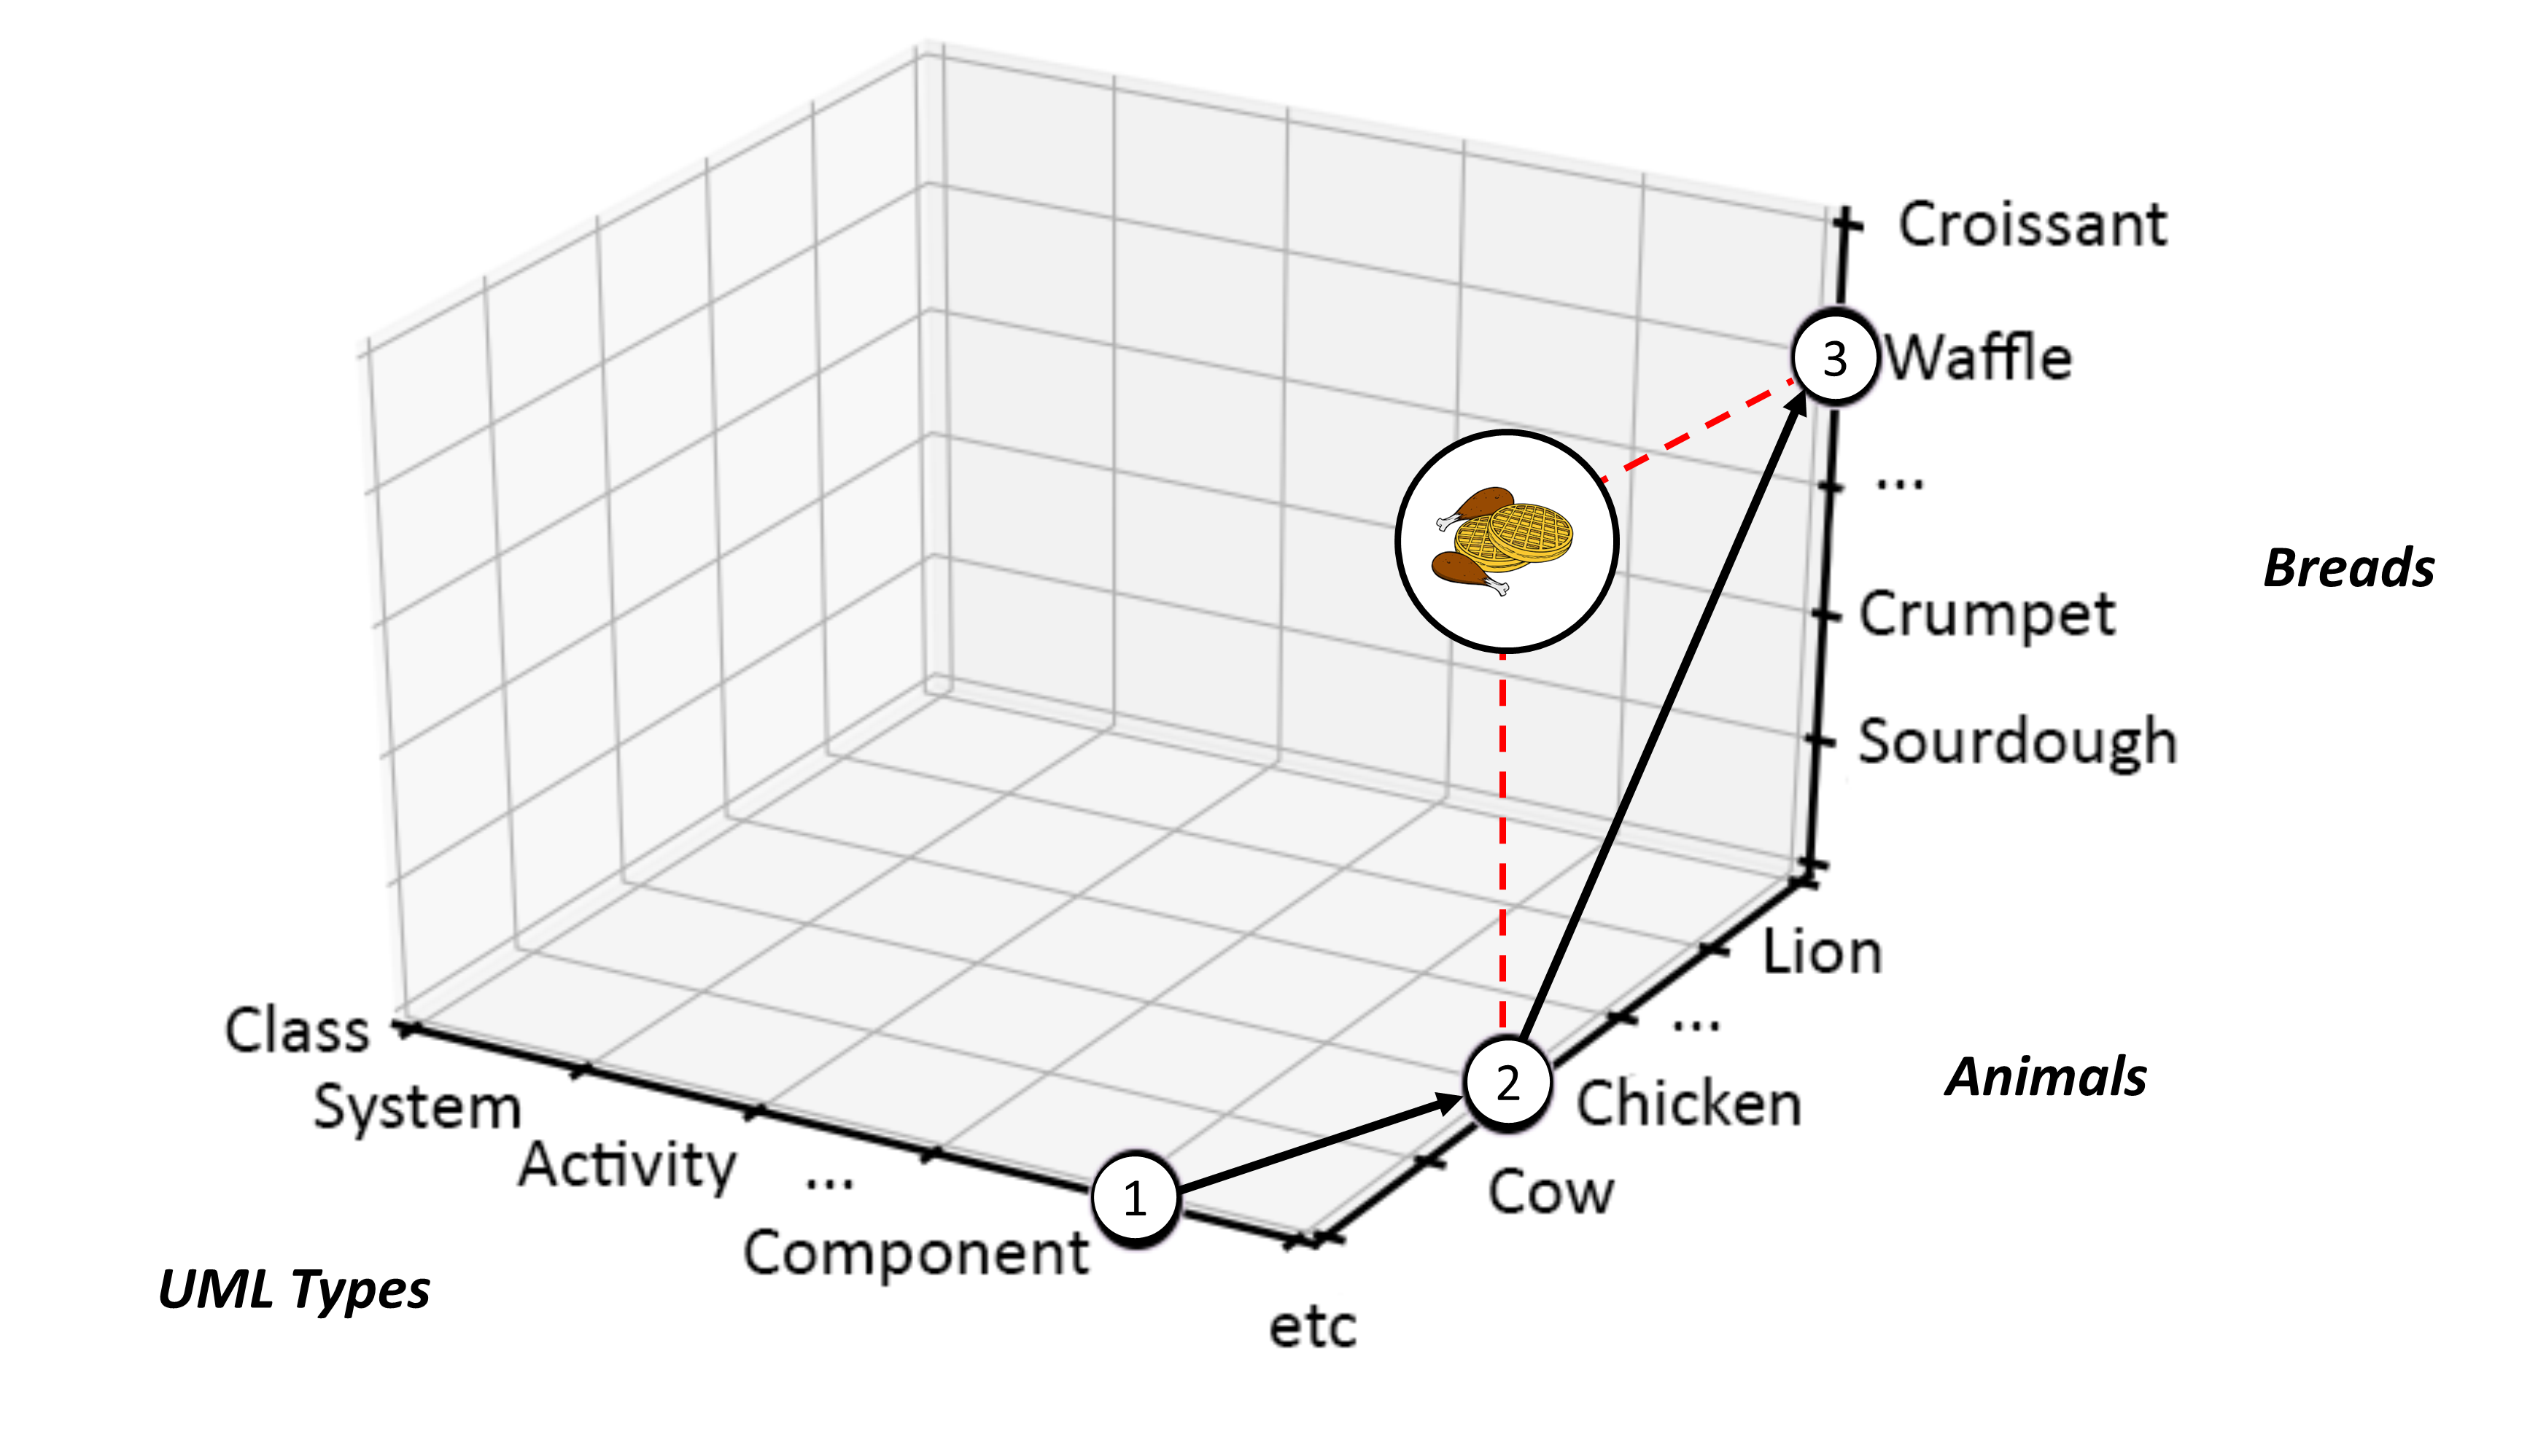 Graphing Out a Chicken and Waffles Breakfast